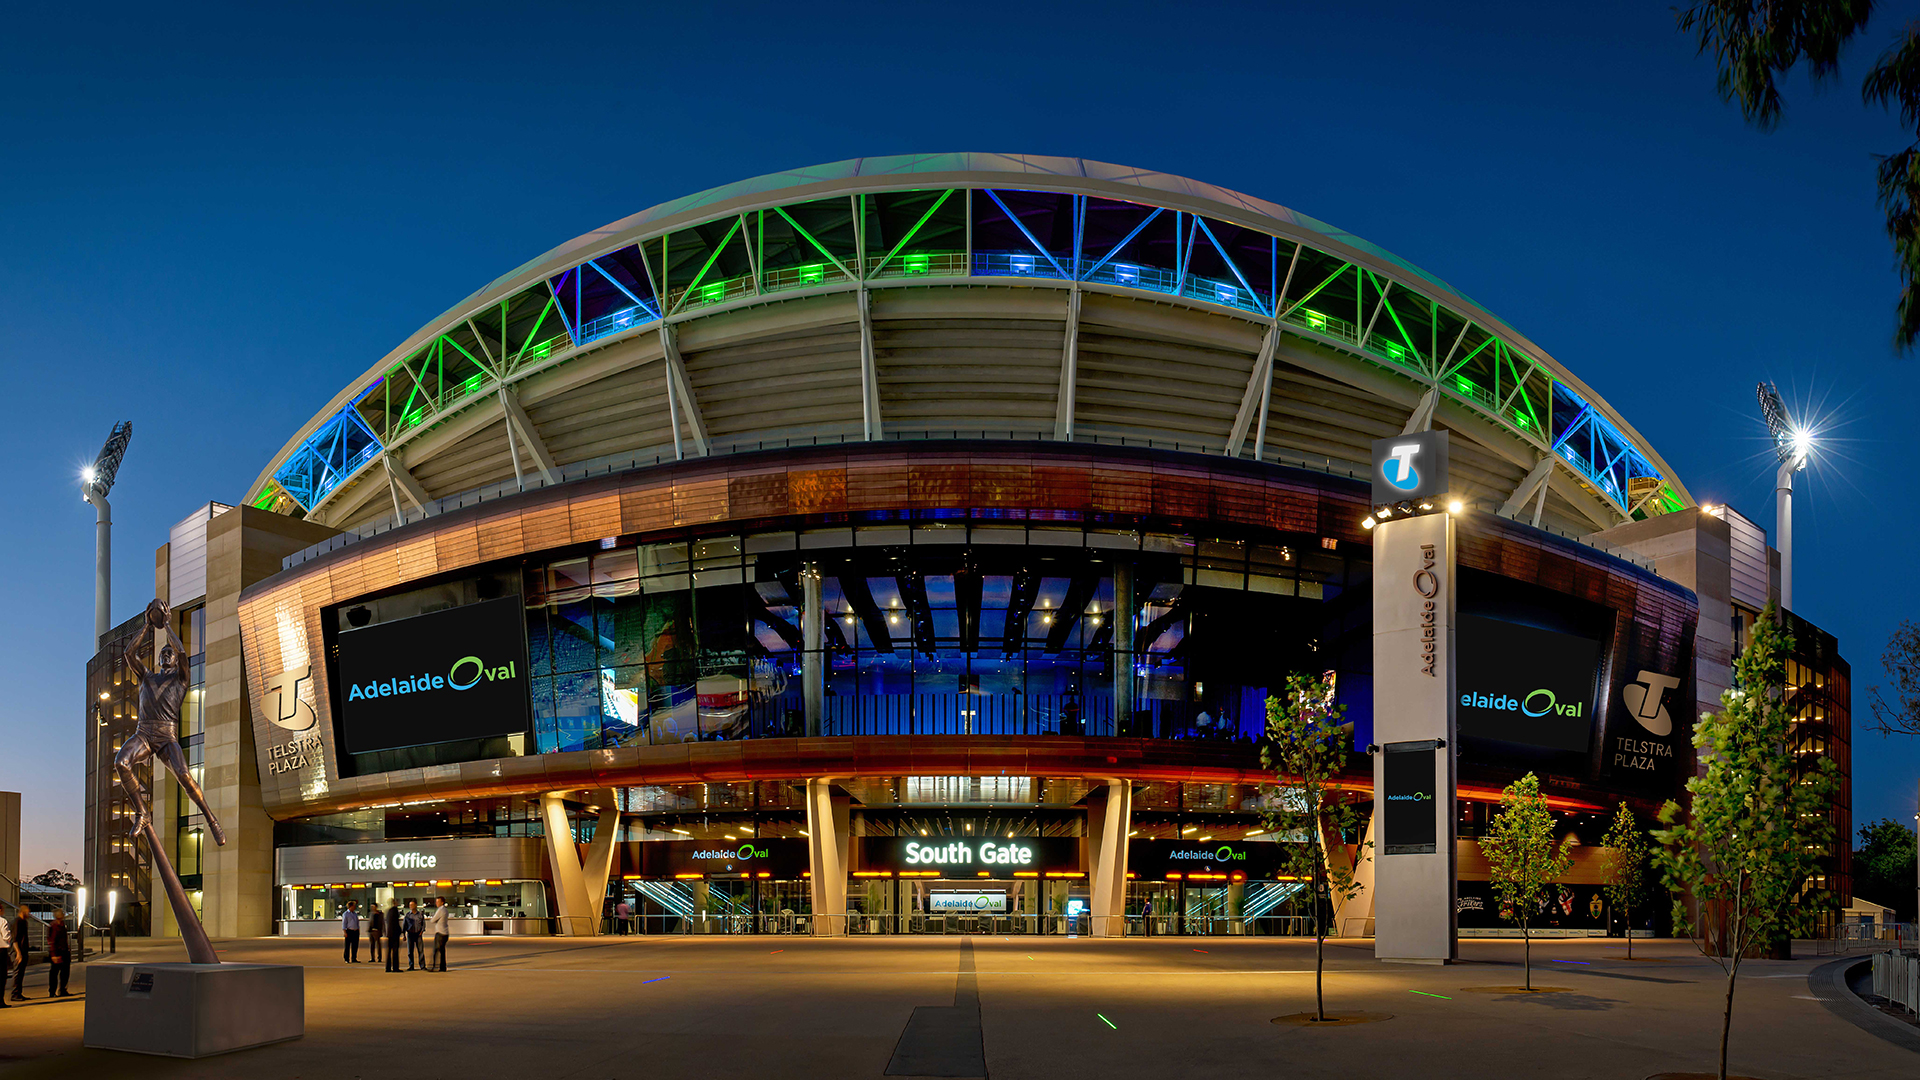 Telstra Plaza at Adelaide Oval